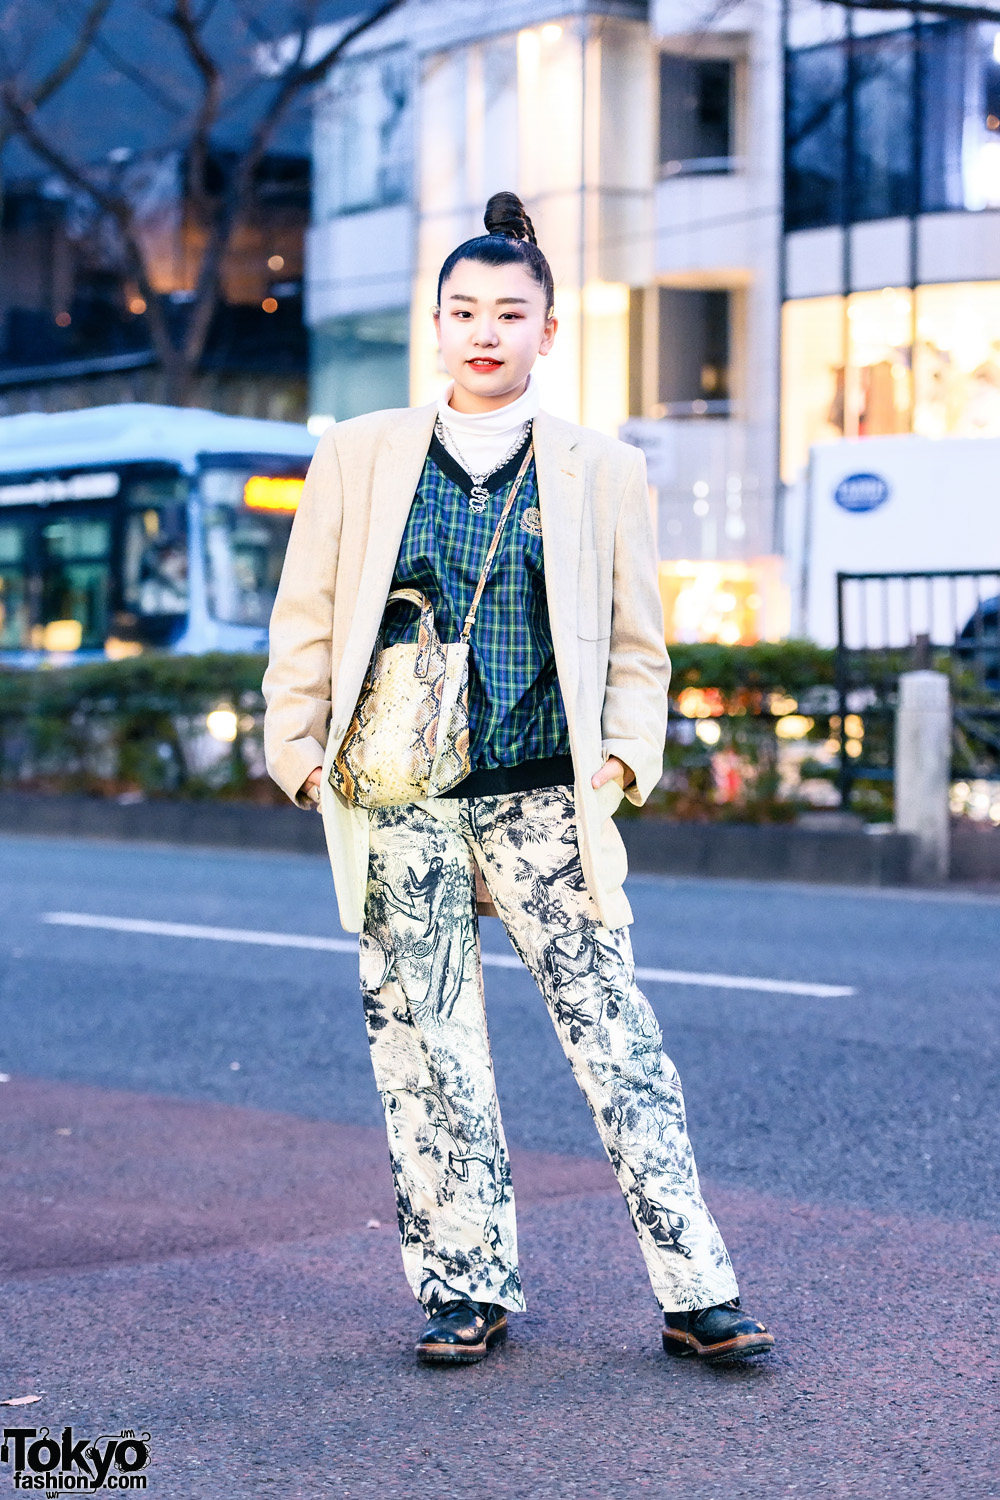 Resale Layered Street Style in Harajuku w/ Braided Bun, Never Mind the XU Dragon Necklace, Linen Blazer, Monochrome Print Pants, H&M Sling & Leather Wingtip Shoes